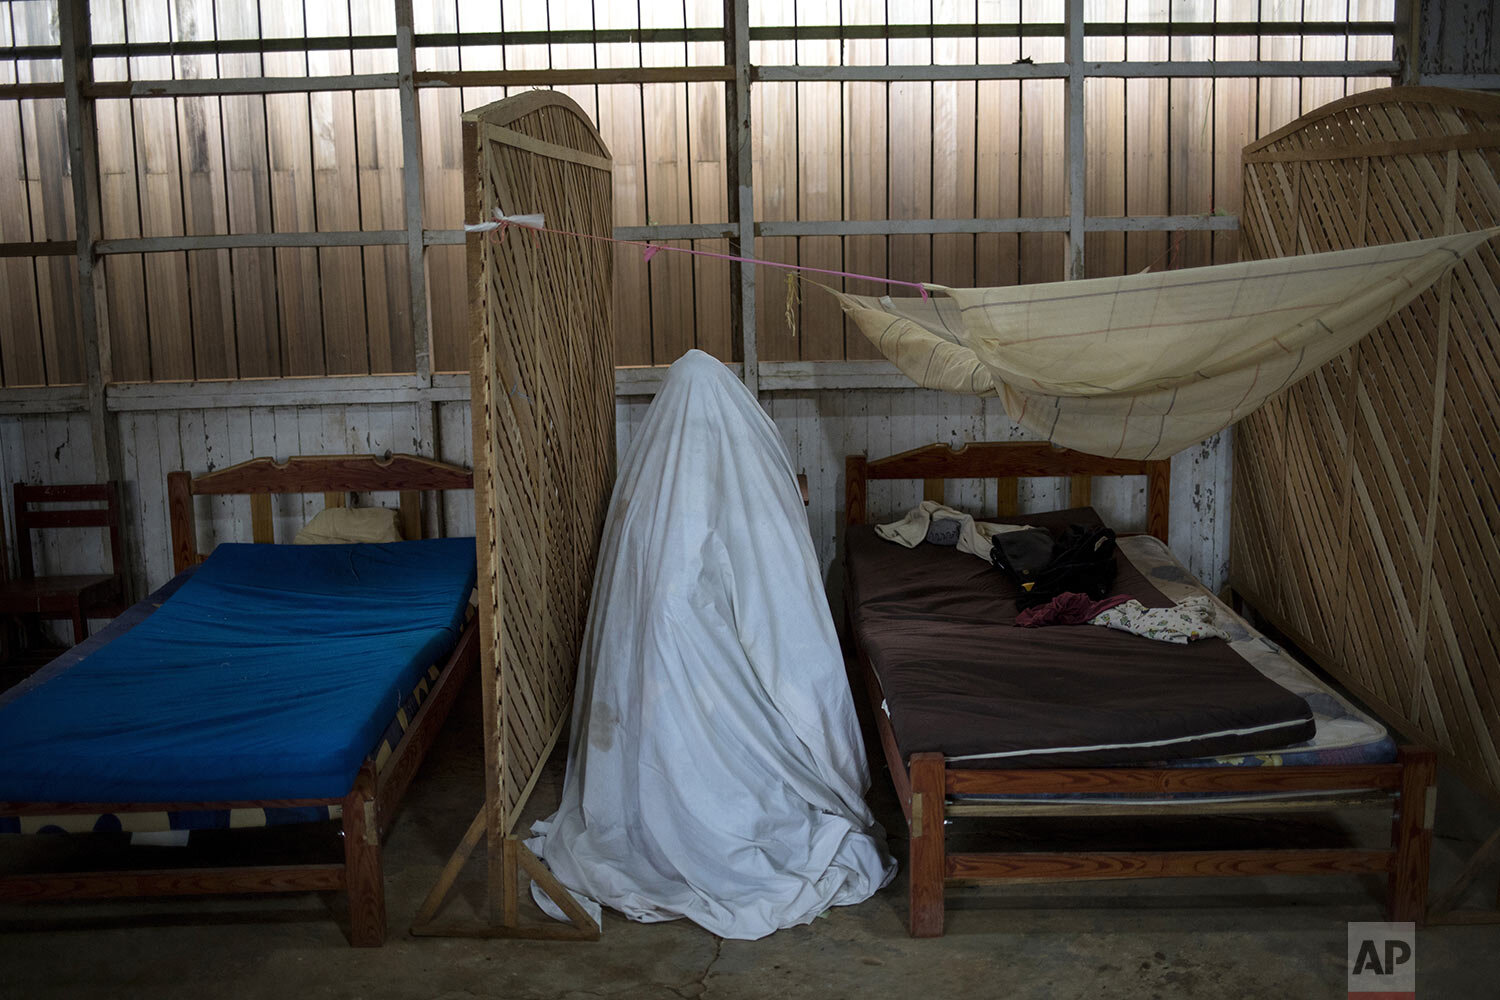  Sara Magin, who suffers COVID-19 symptoms, sits under a bedsheet for herbal vapor therapy in the Shipibo Indigenous community of Pucallpa, in Peru's Ucayali region, Sept. 1, 2020. The treatment center takes the holistic approach to treating the viru